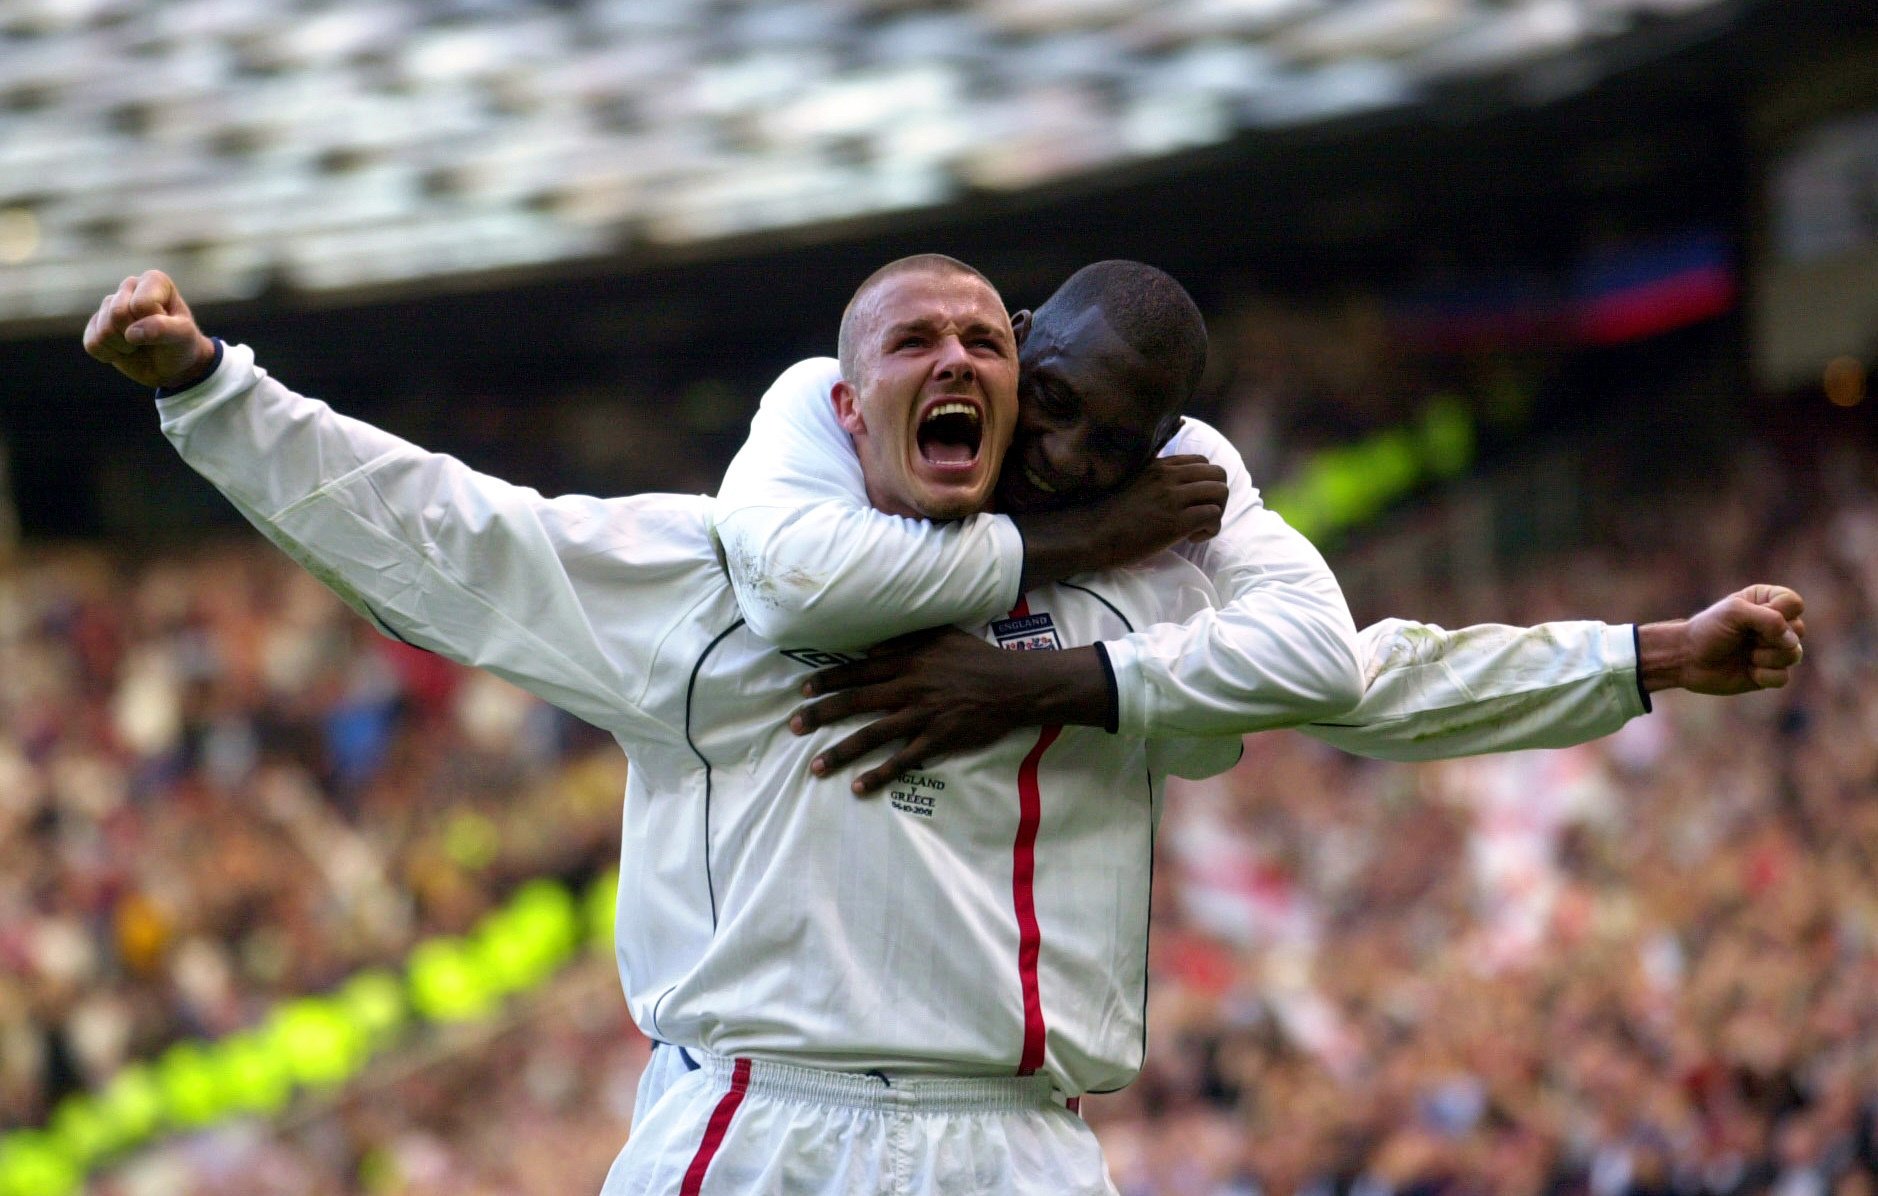 Looking back on that iconic David Beckham free-kick 20-years-ago that sent England to the World Cup